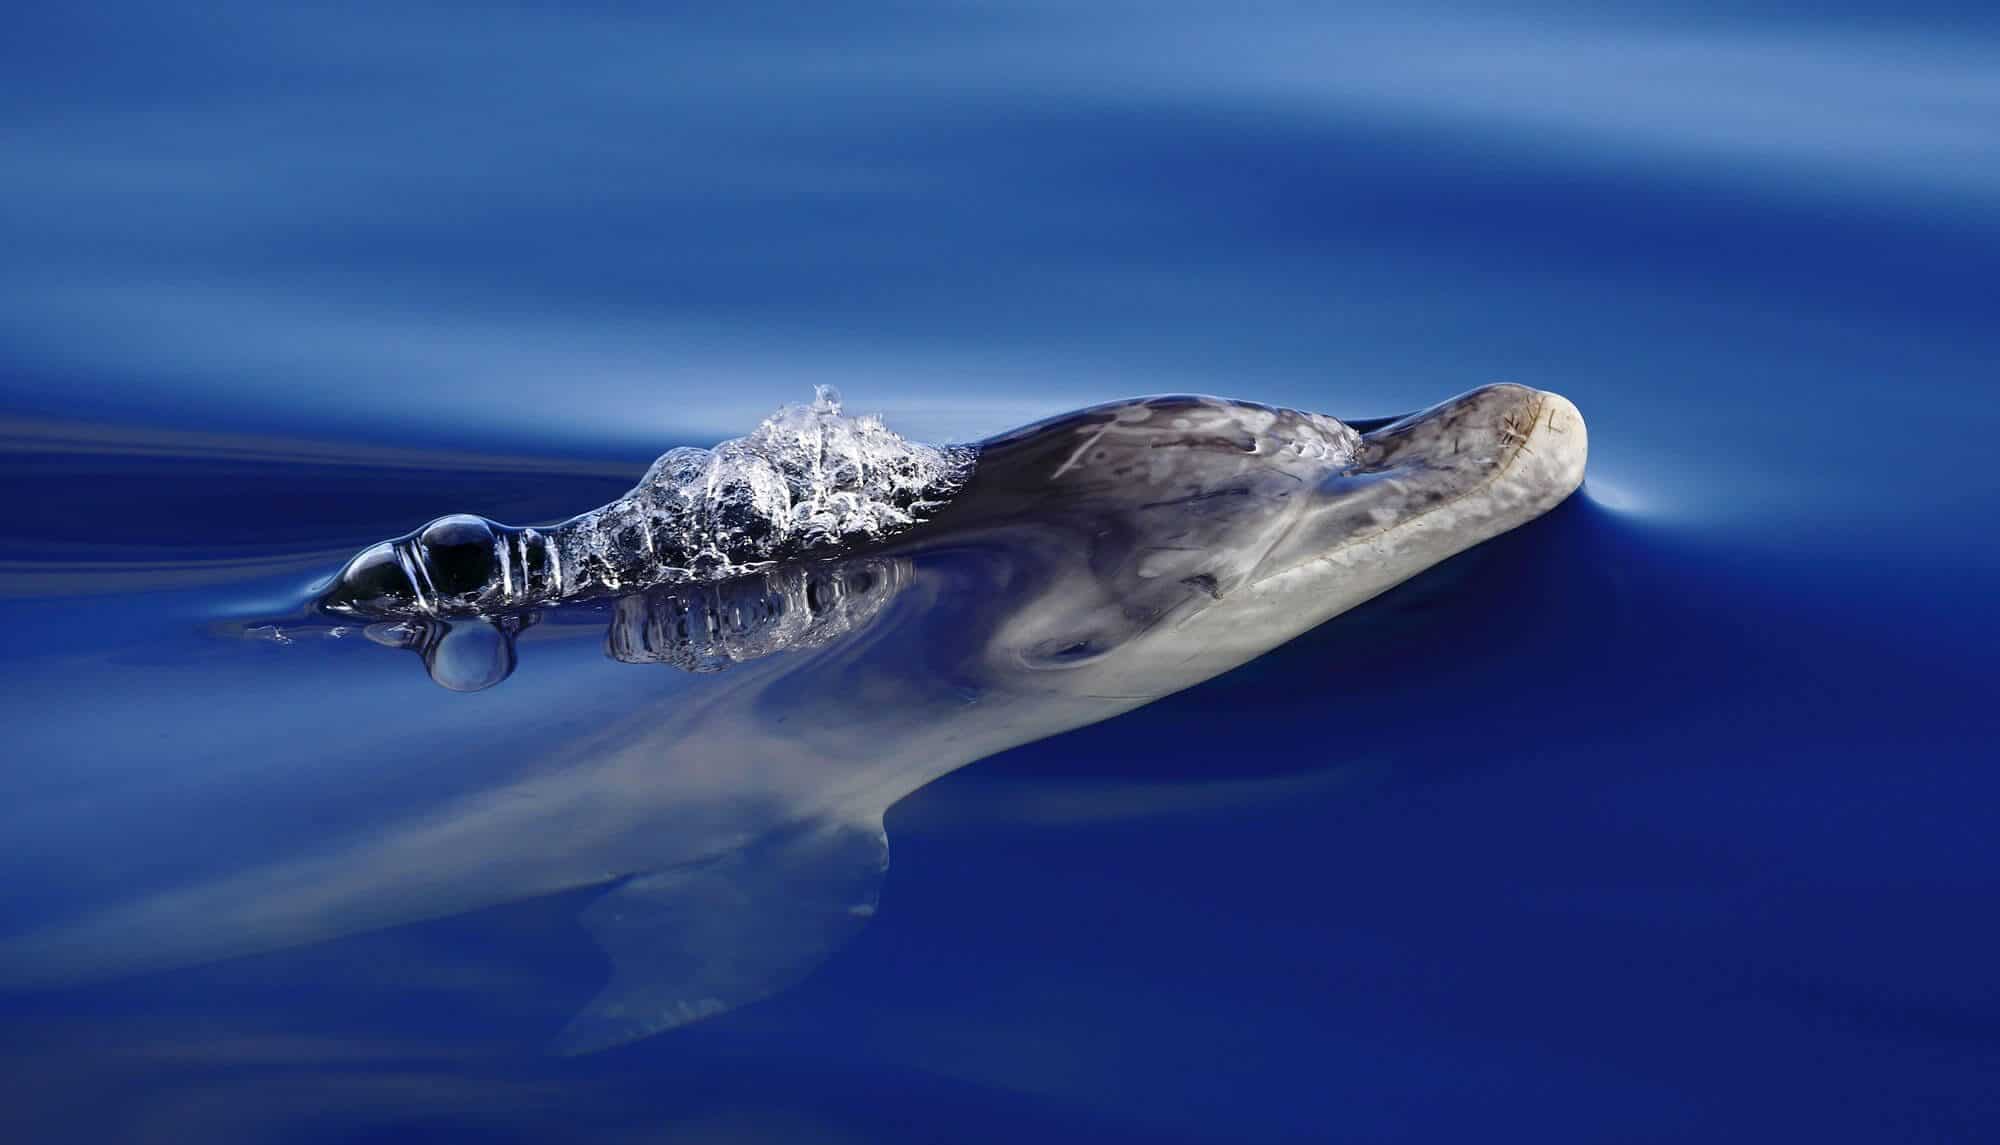 Dolphin facts and information - Whale and Dolphin Conservation